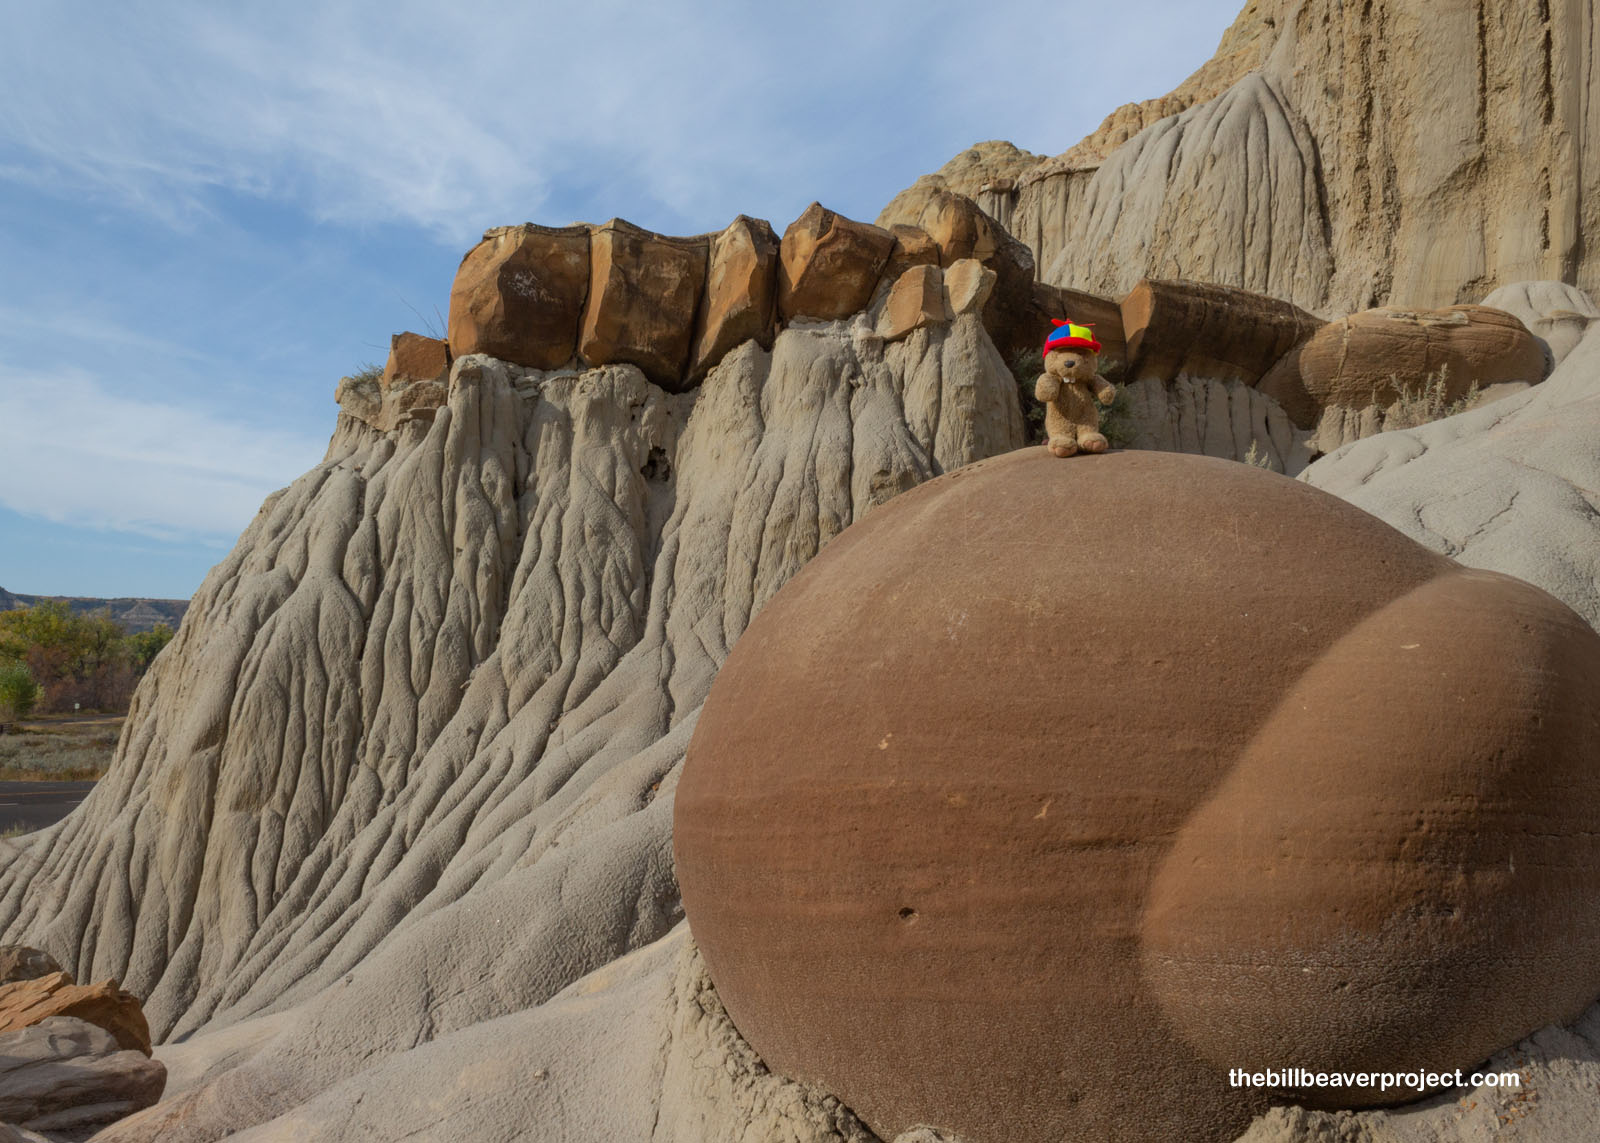 The famous cannonball concretions!